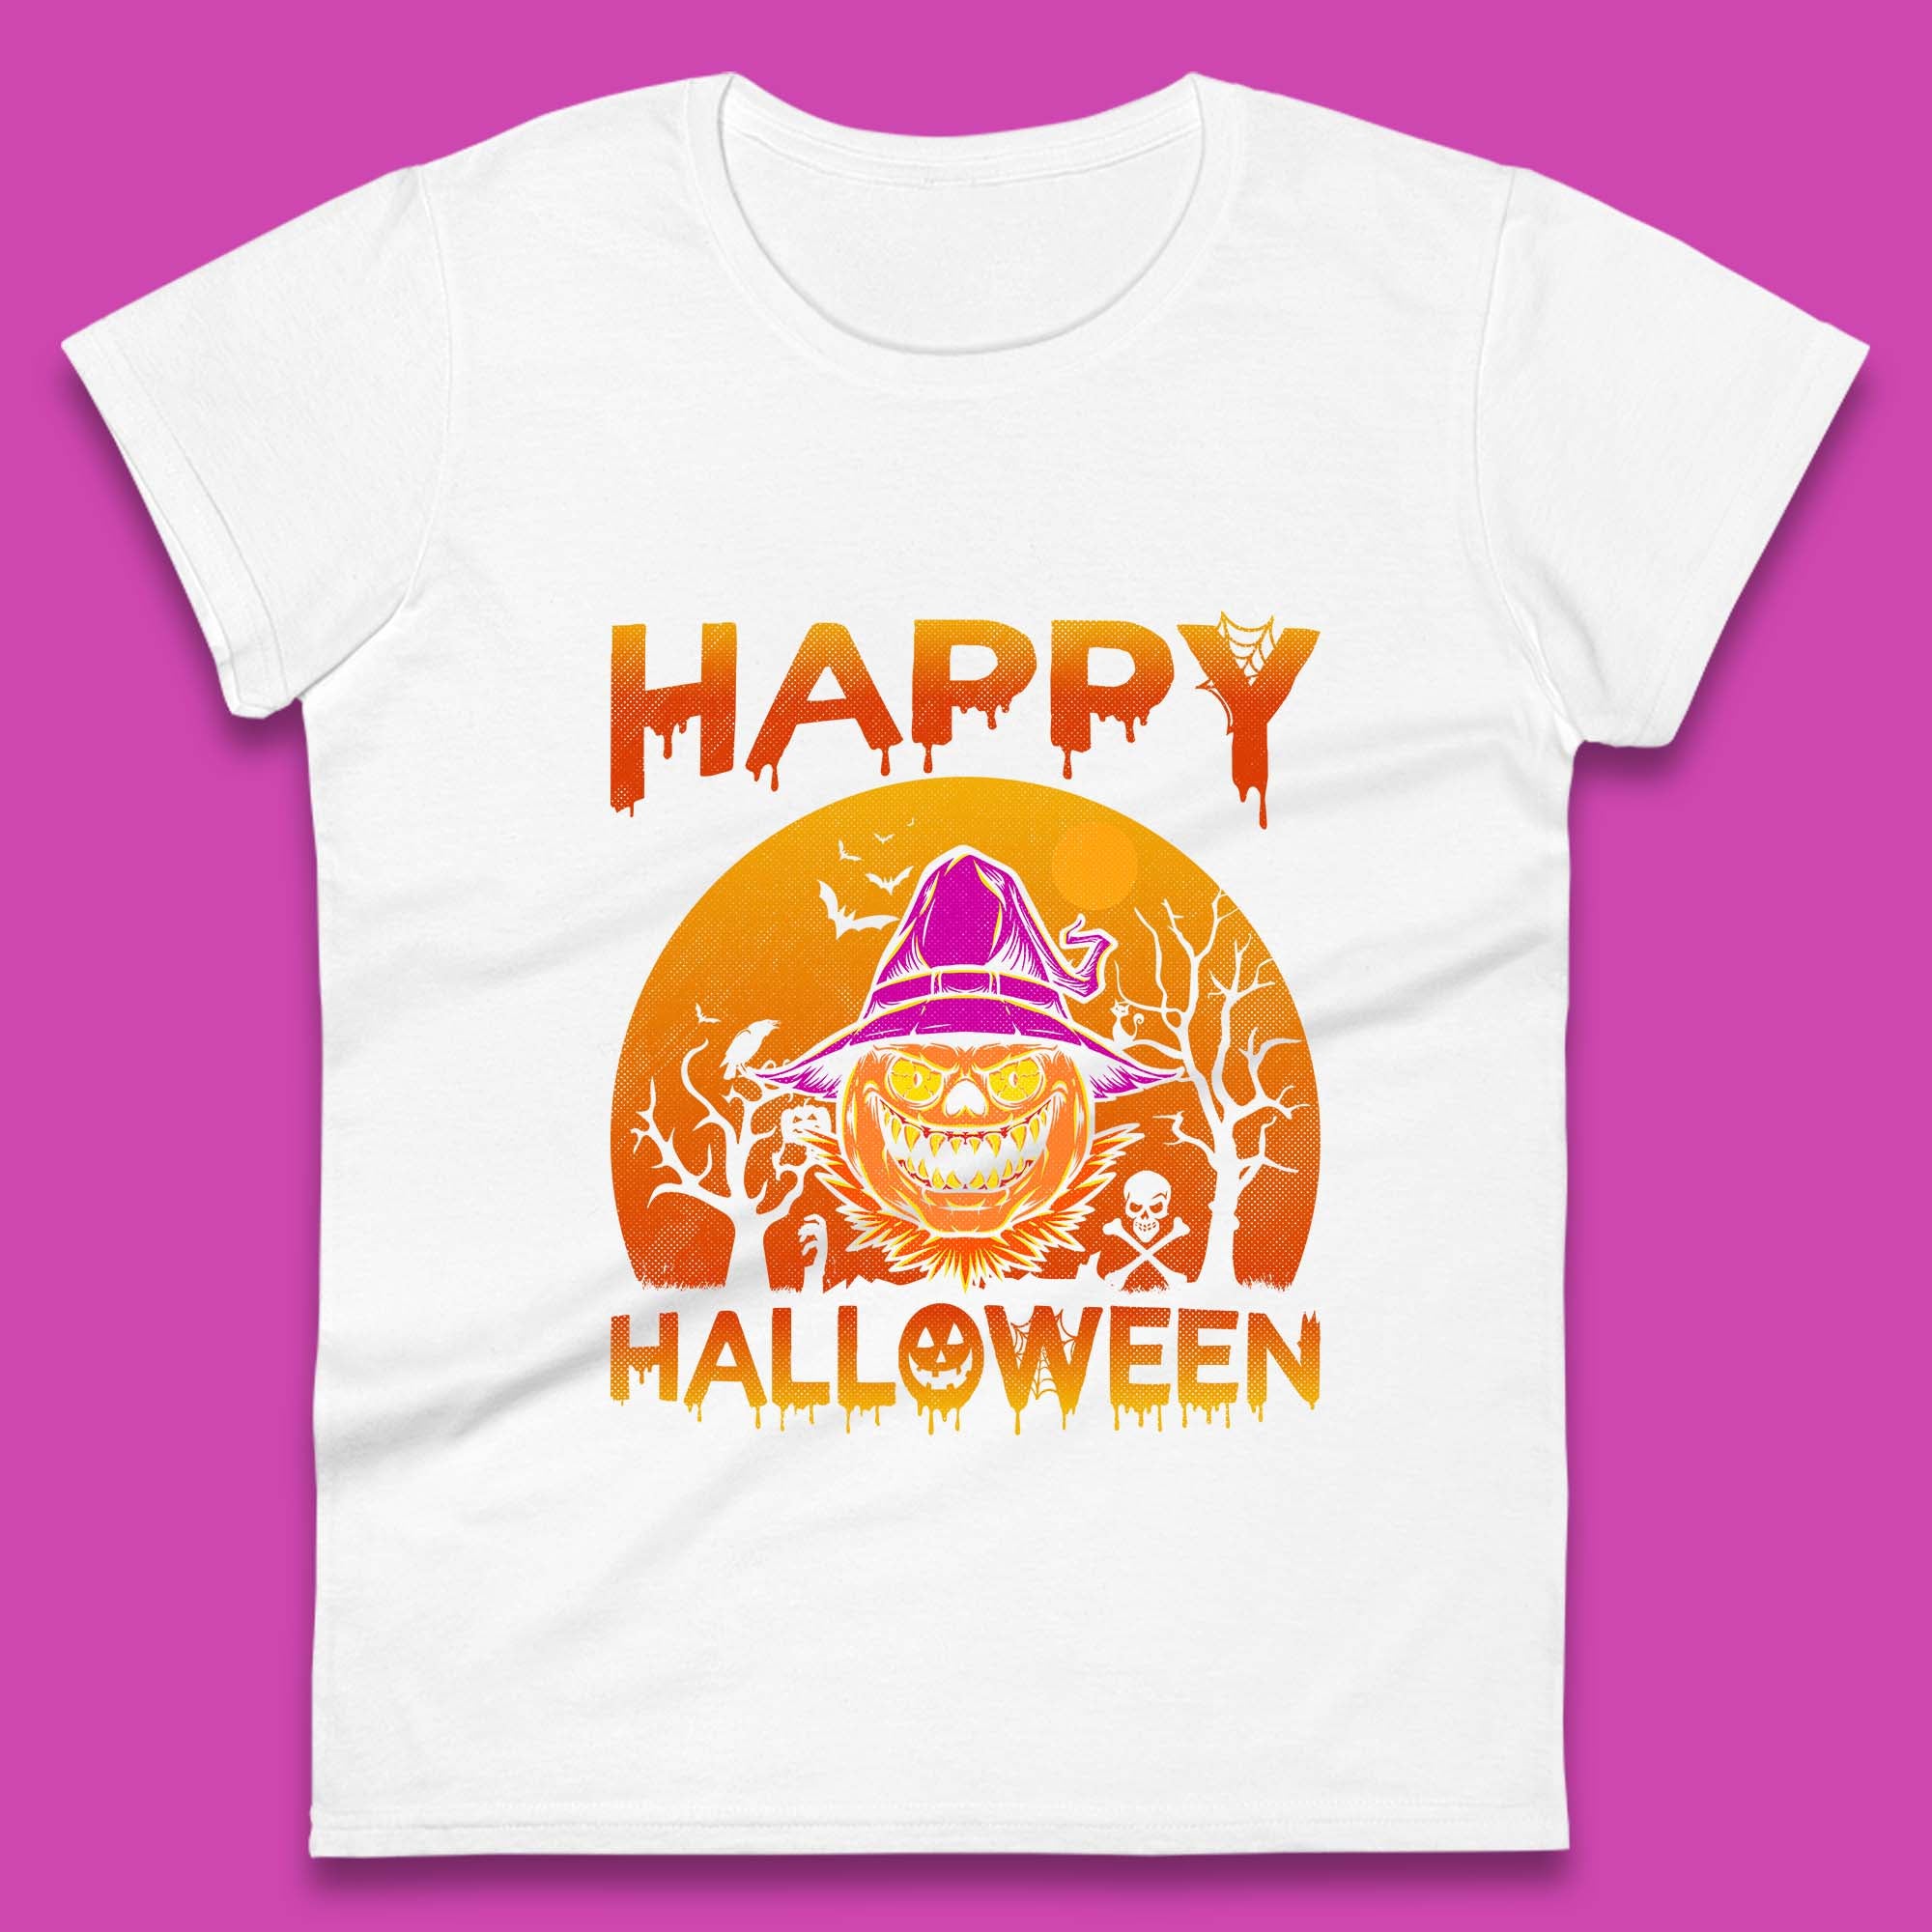 Happy Halloween Monster Pumpkin With Witch Hat Horror Scary Spooky Season Womens Tee Top